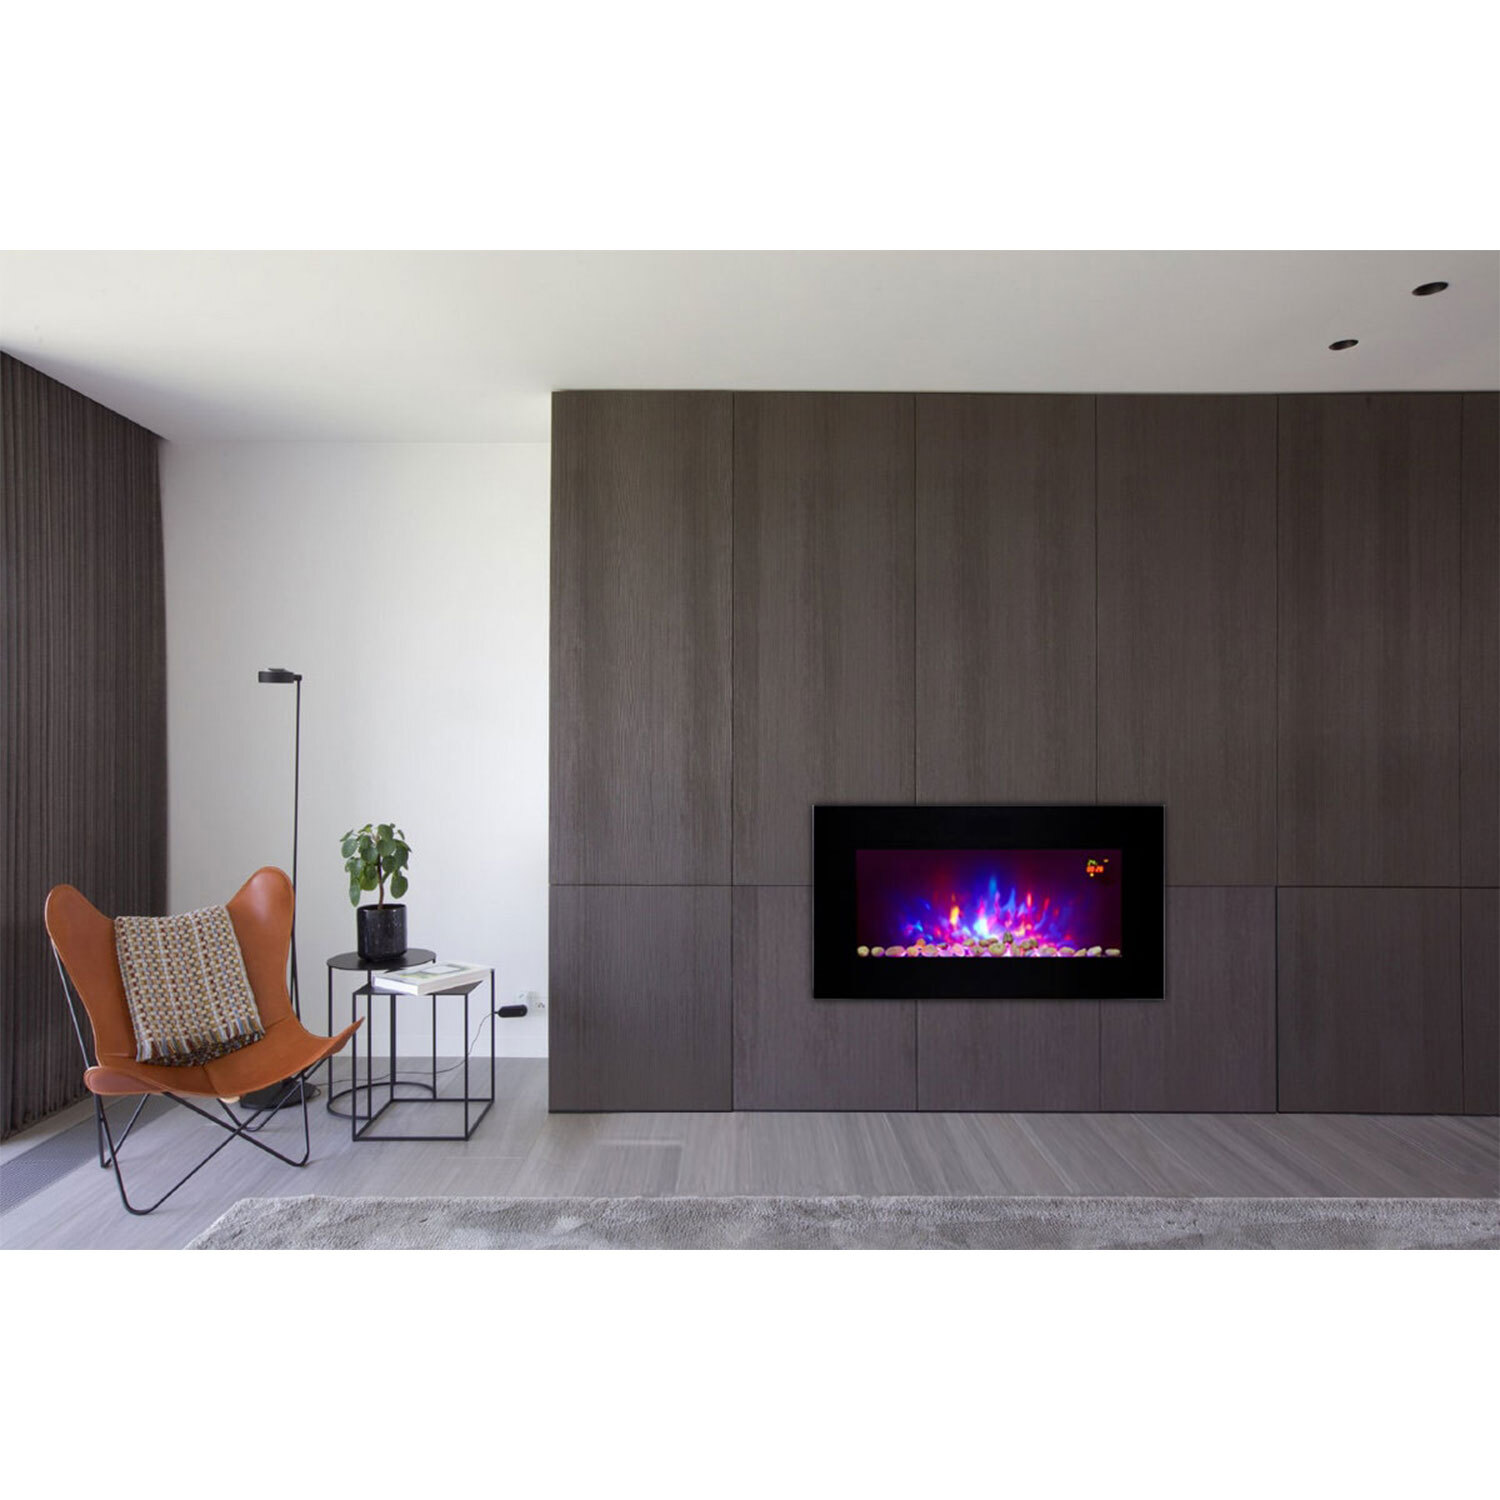 MyHome Black Aspen Wall Mounted Electric Firesuite Image 2